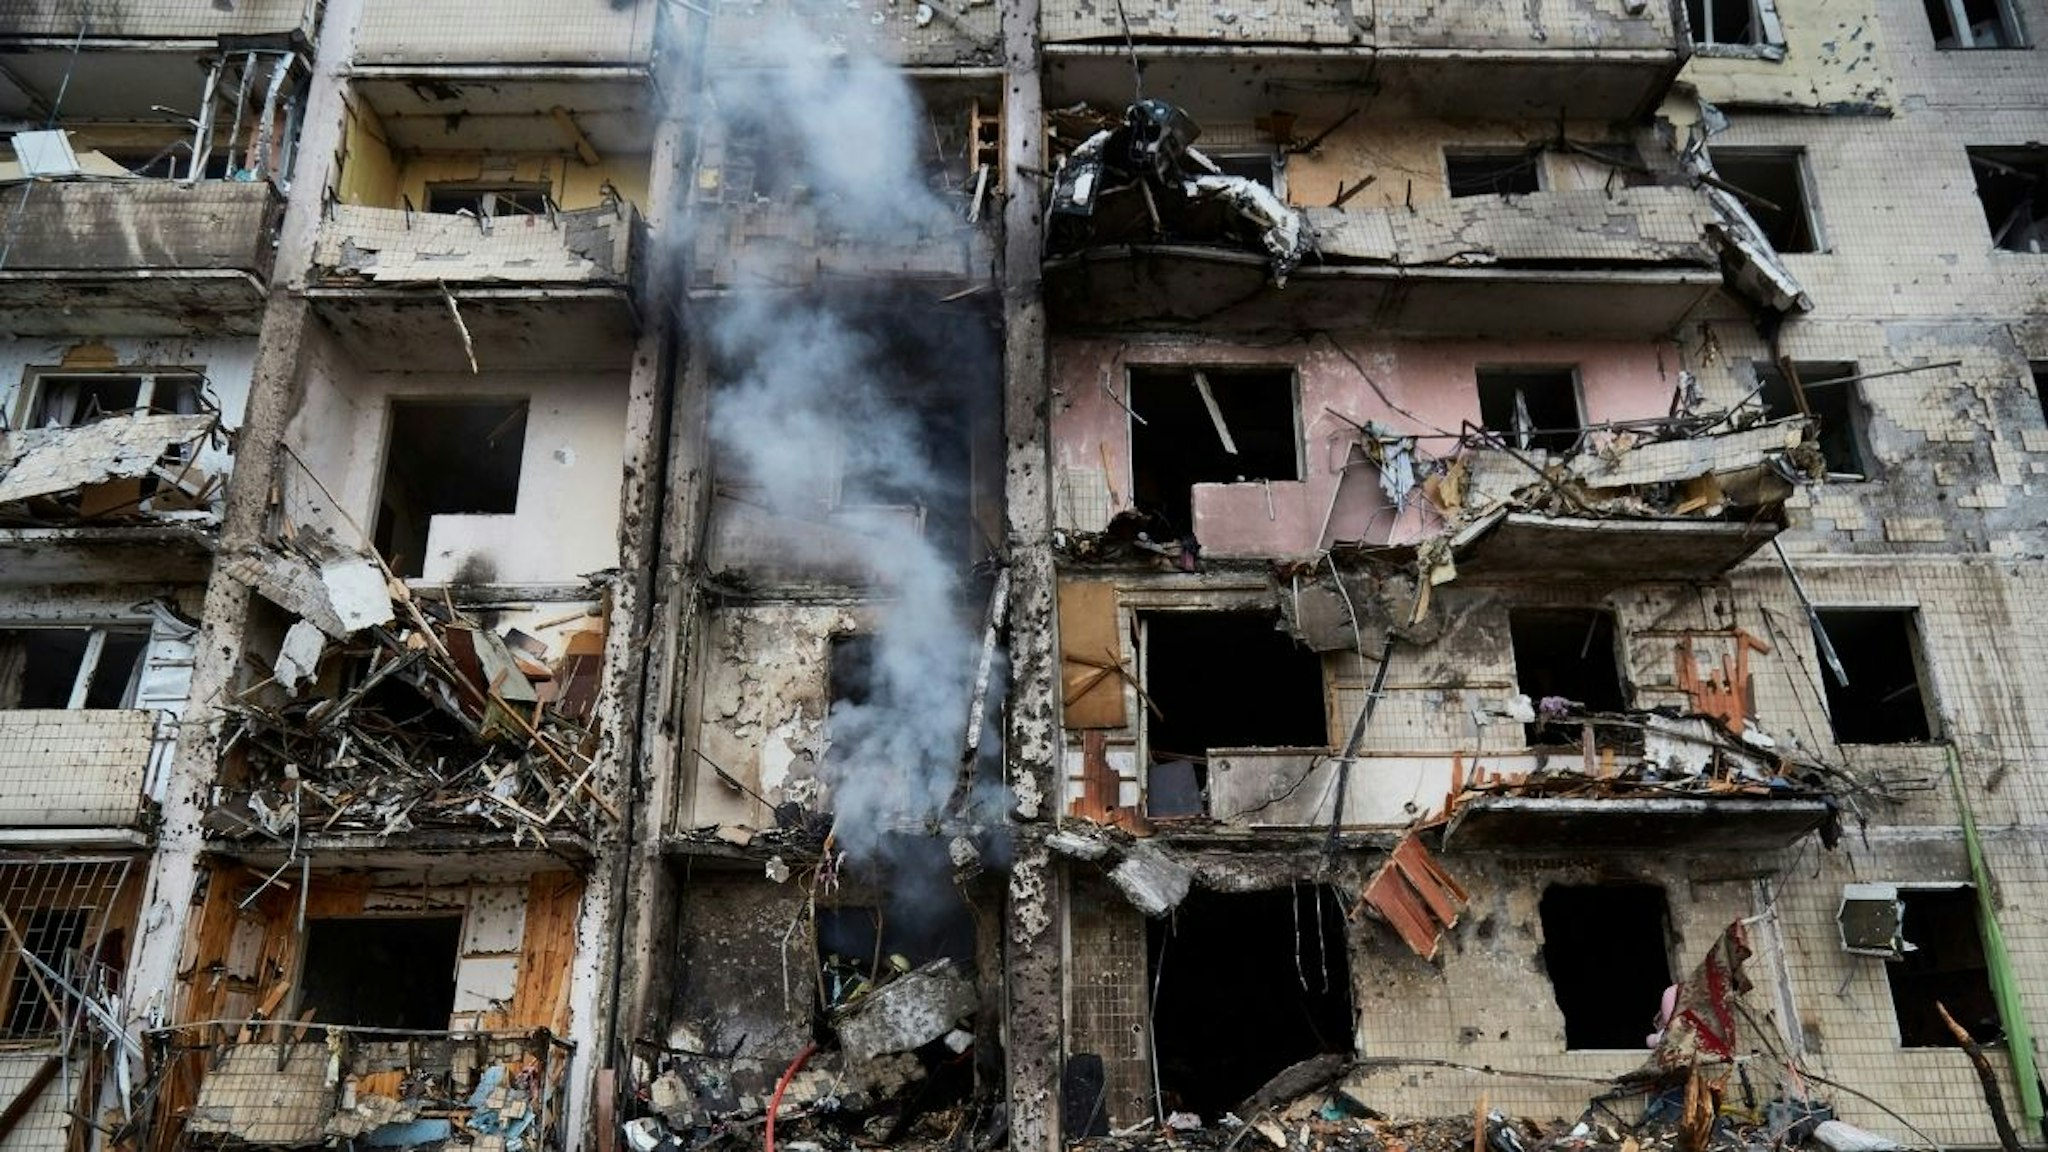 Firemen extinguish a fire inside a residential building that was hit by a missile on February 25, 2022 in Kyiv, Ukraine. Yesterday, Russia began a large-scale attack on Ukraine, with Russian troops invading the country from the north, east and south, accompanied by air strikes and shelling.